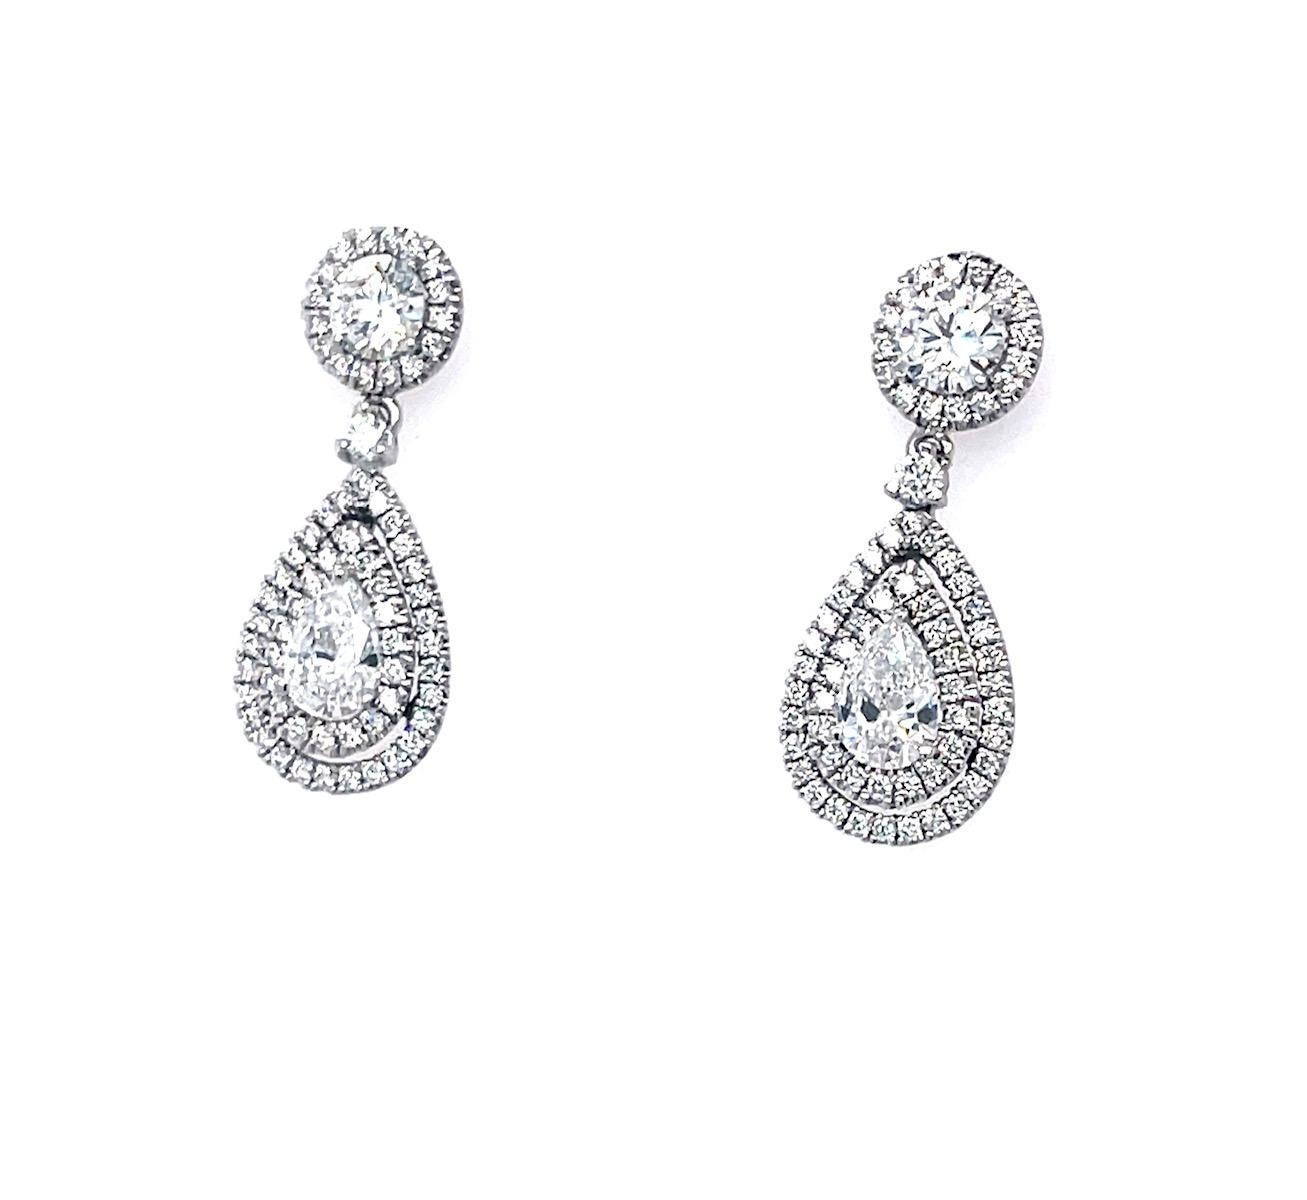 Contemporary 2.32 Carats Round and Pear Shape Diamond Drop Earrings 18k White Gold